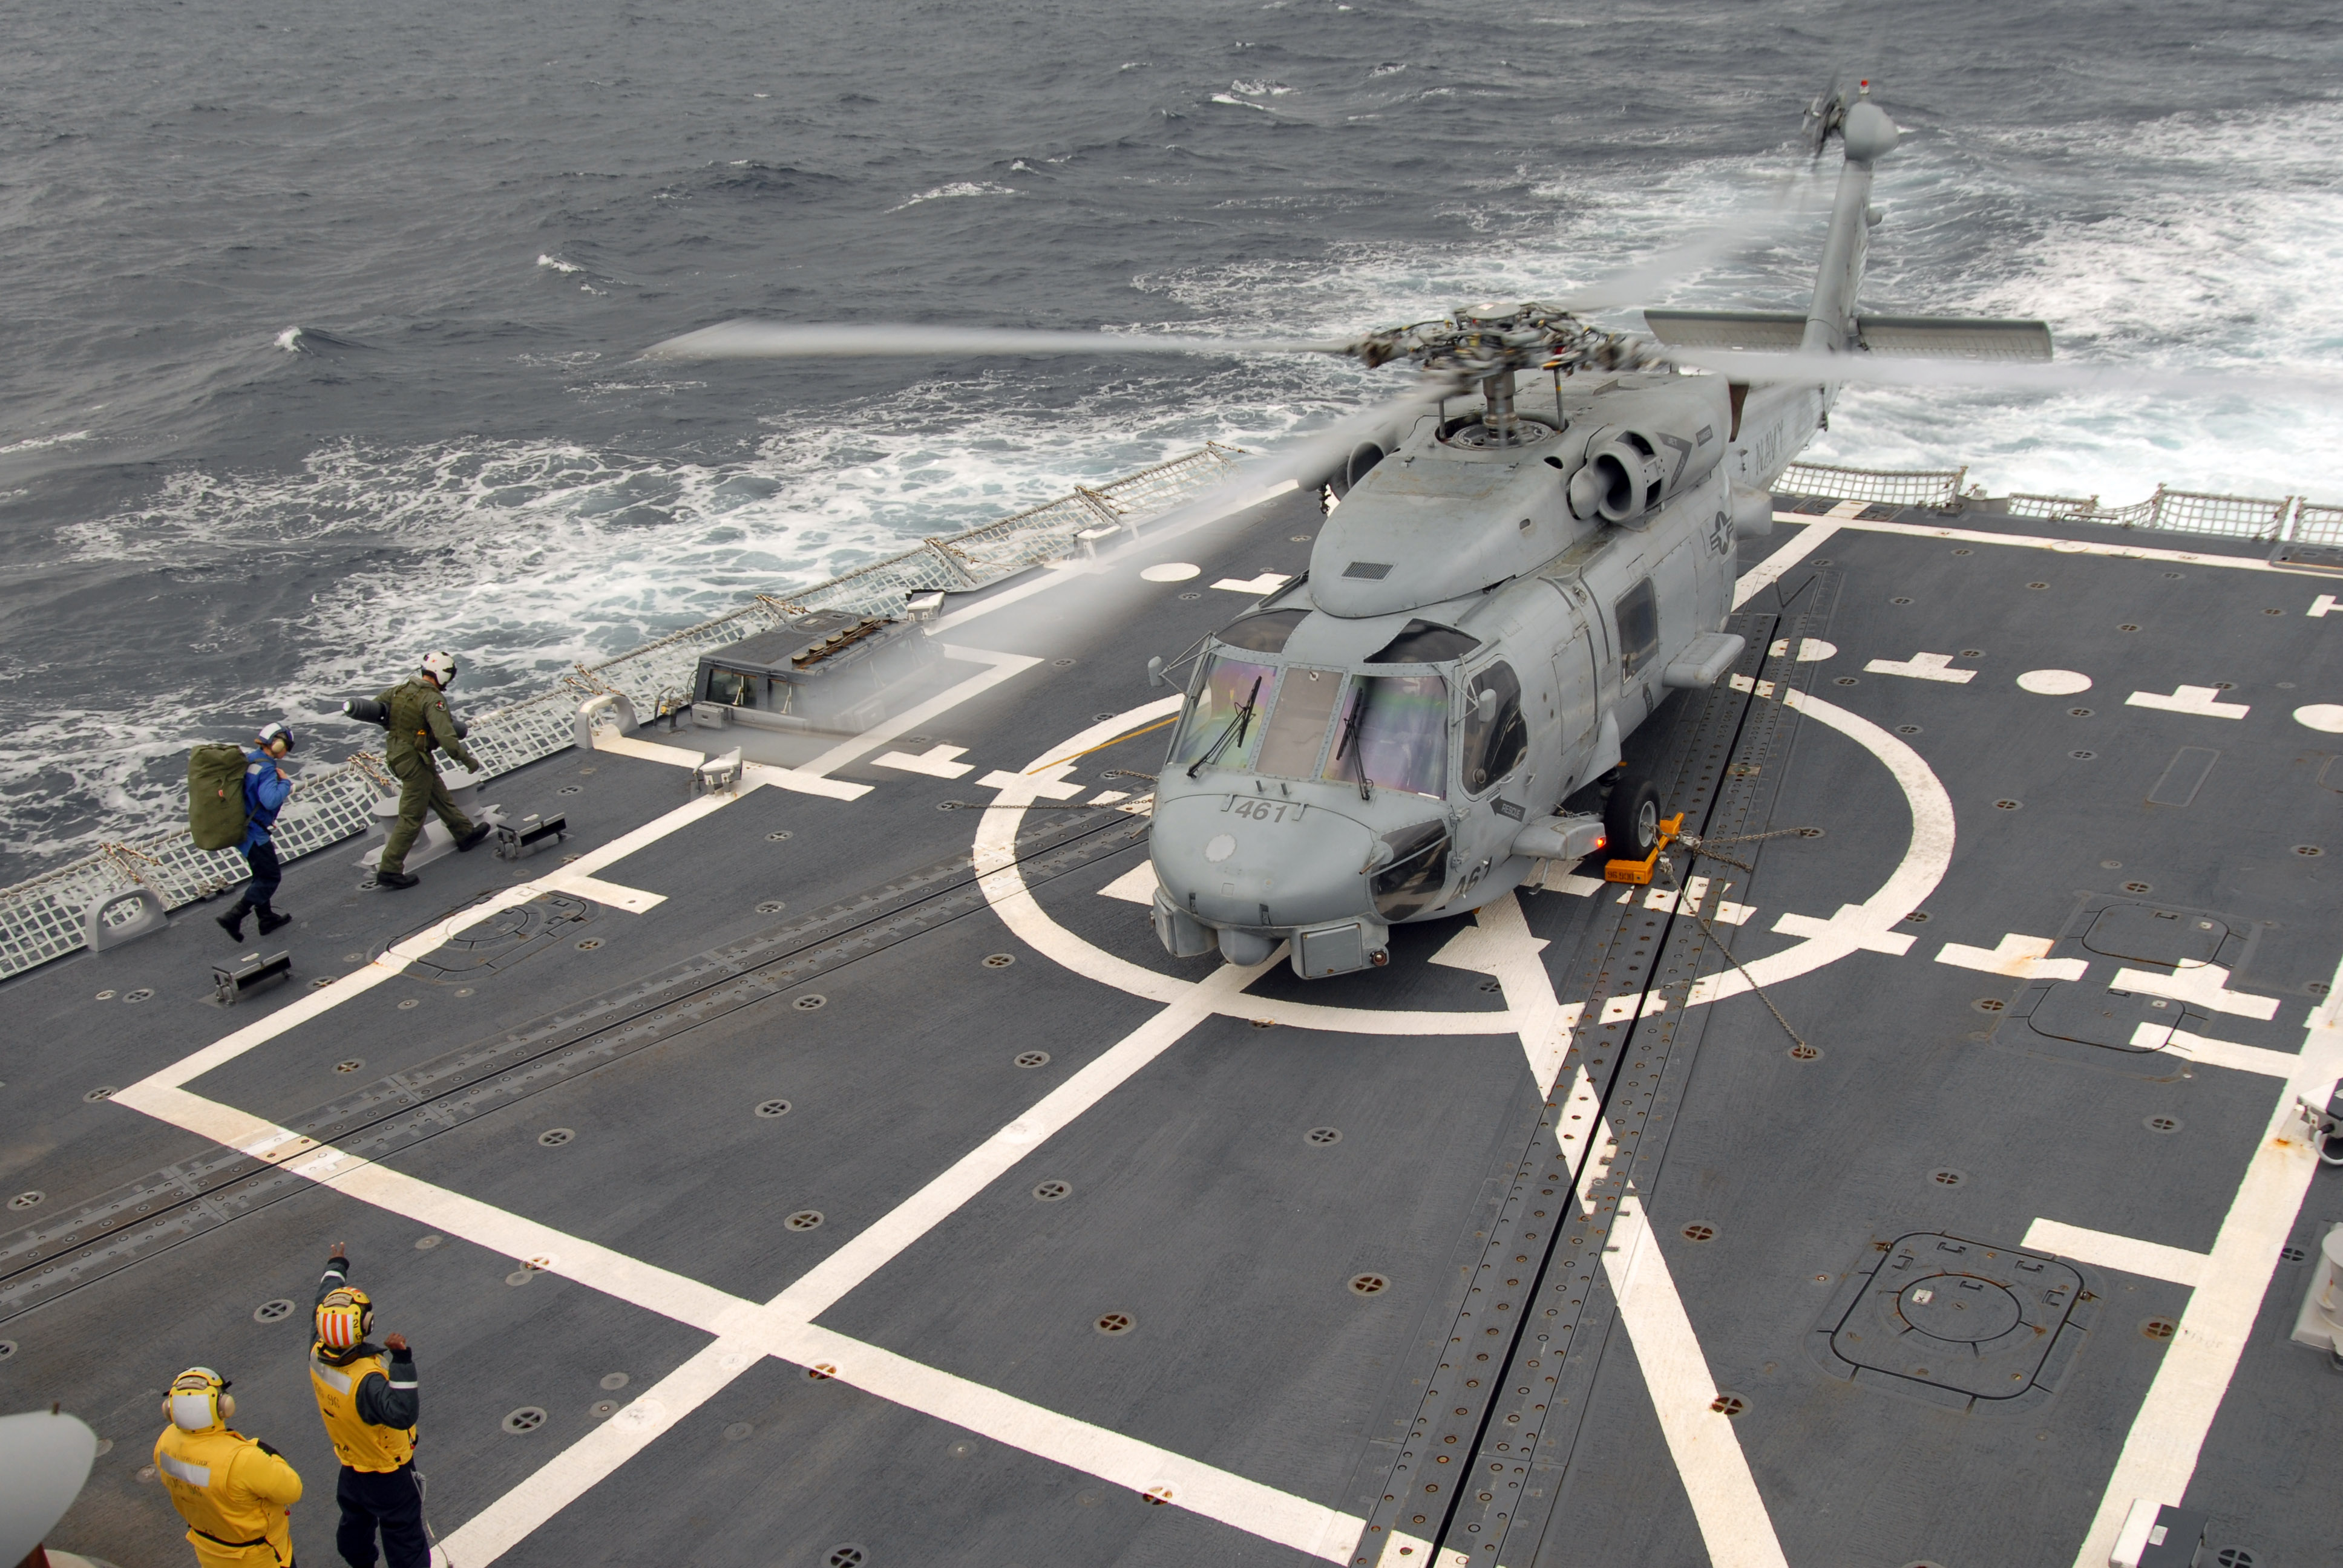 US Navy 070409-N-5681S-016 An SH-60B Seahawk assigned to Helicopter Anti-Submarine Squadron Light (HSL) 46 lands aboard the guided missile destroyer USS Bainbridge (DDG 96)